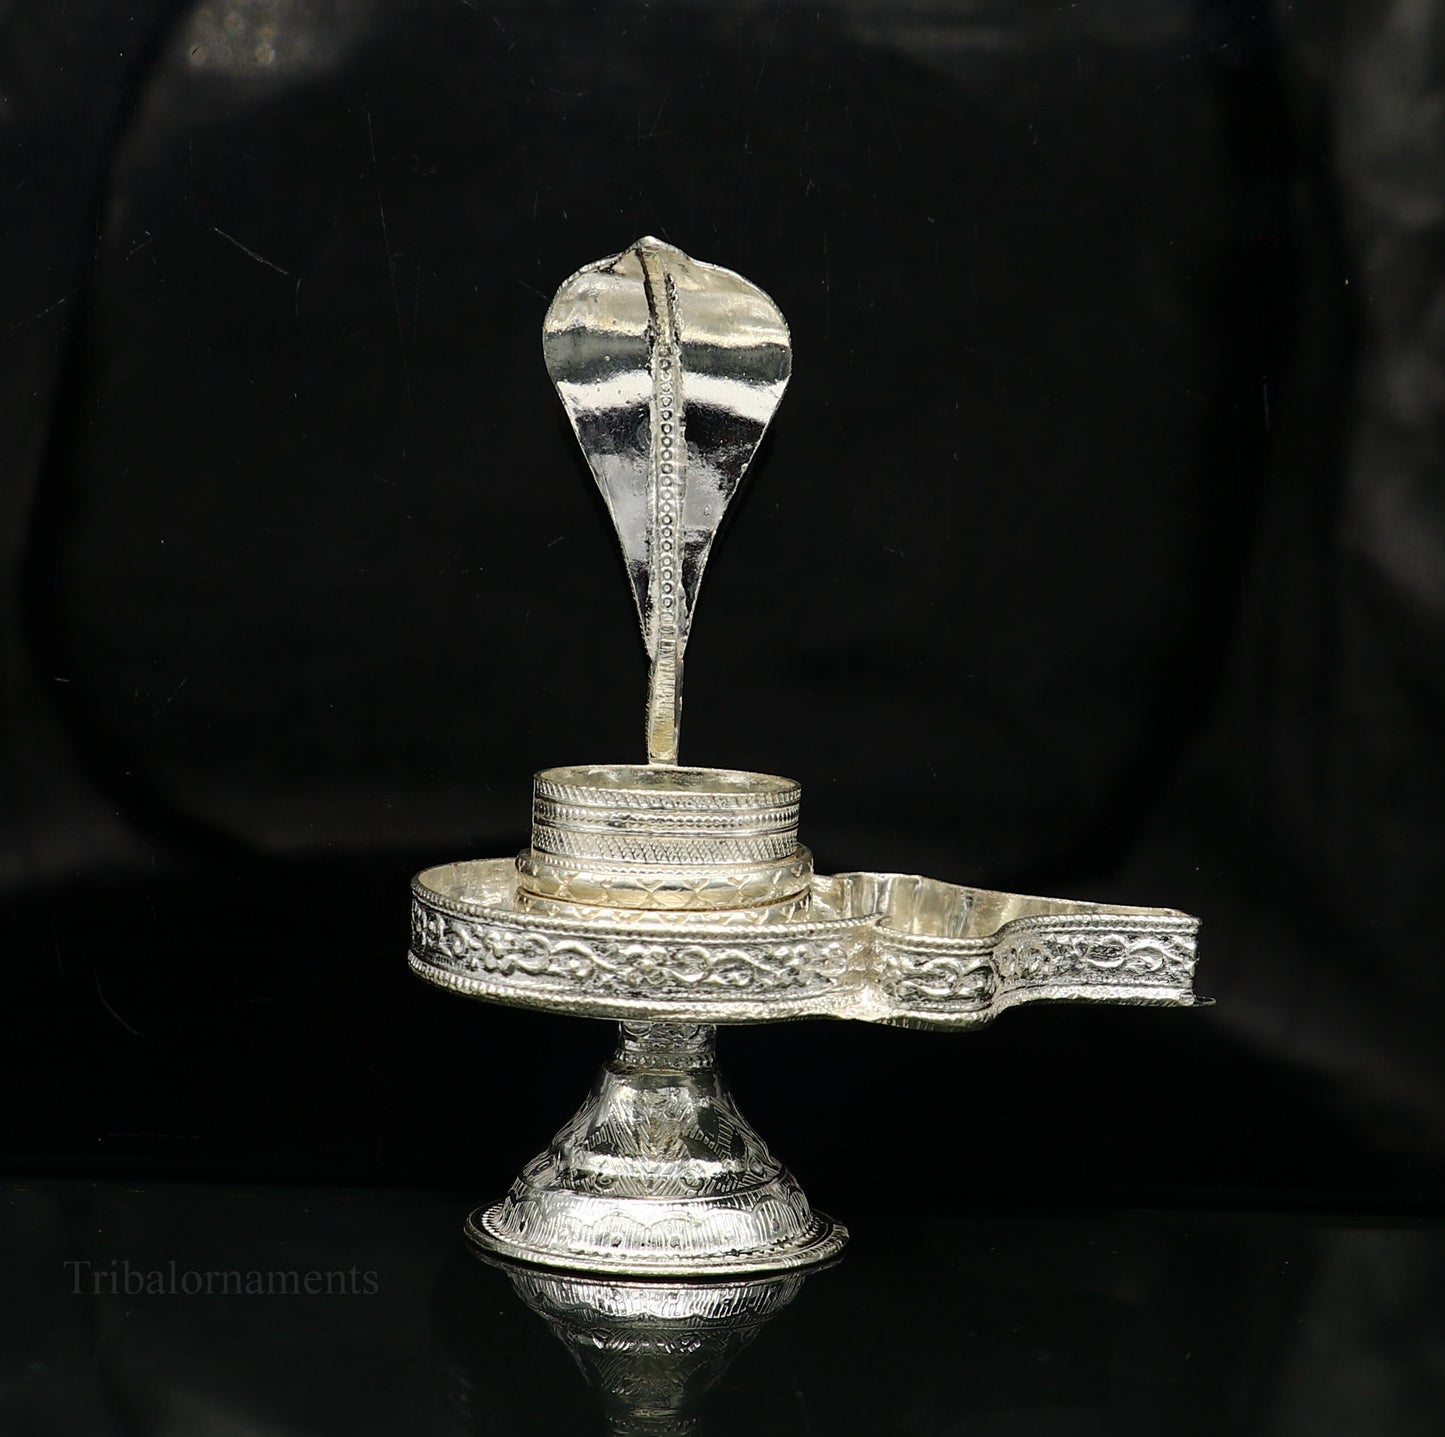 Pure 925 solid sterling silver lord shiva lingam stand/jalheri, use for put/hold shiva lingam in home temple, Shiva Vratam puja art su363 - TRIBAL ORNAMENTS